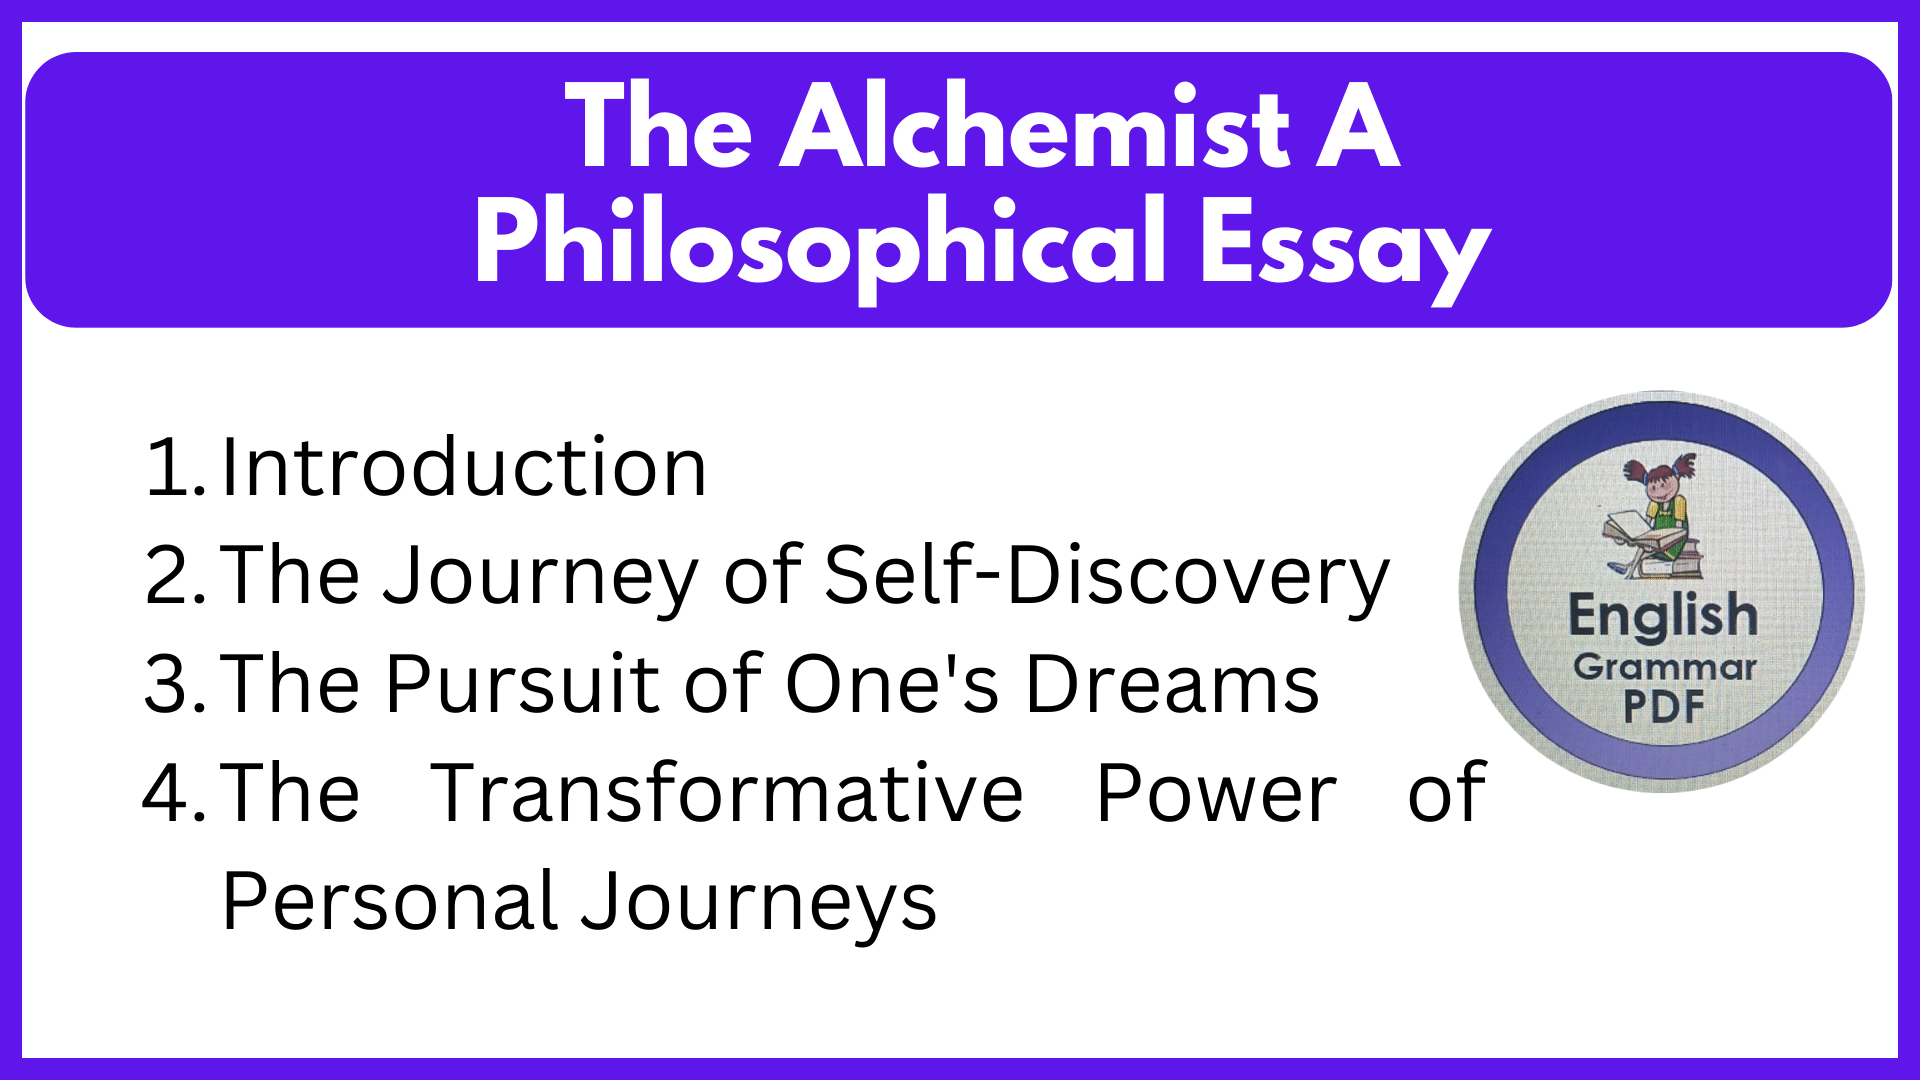 The Alchemist A Philosophical Essay